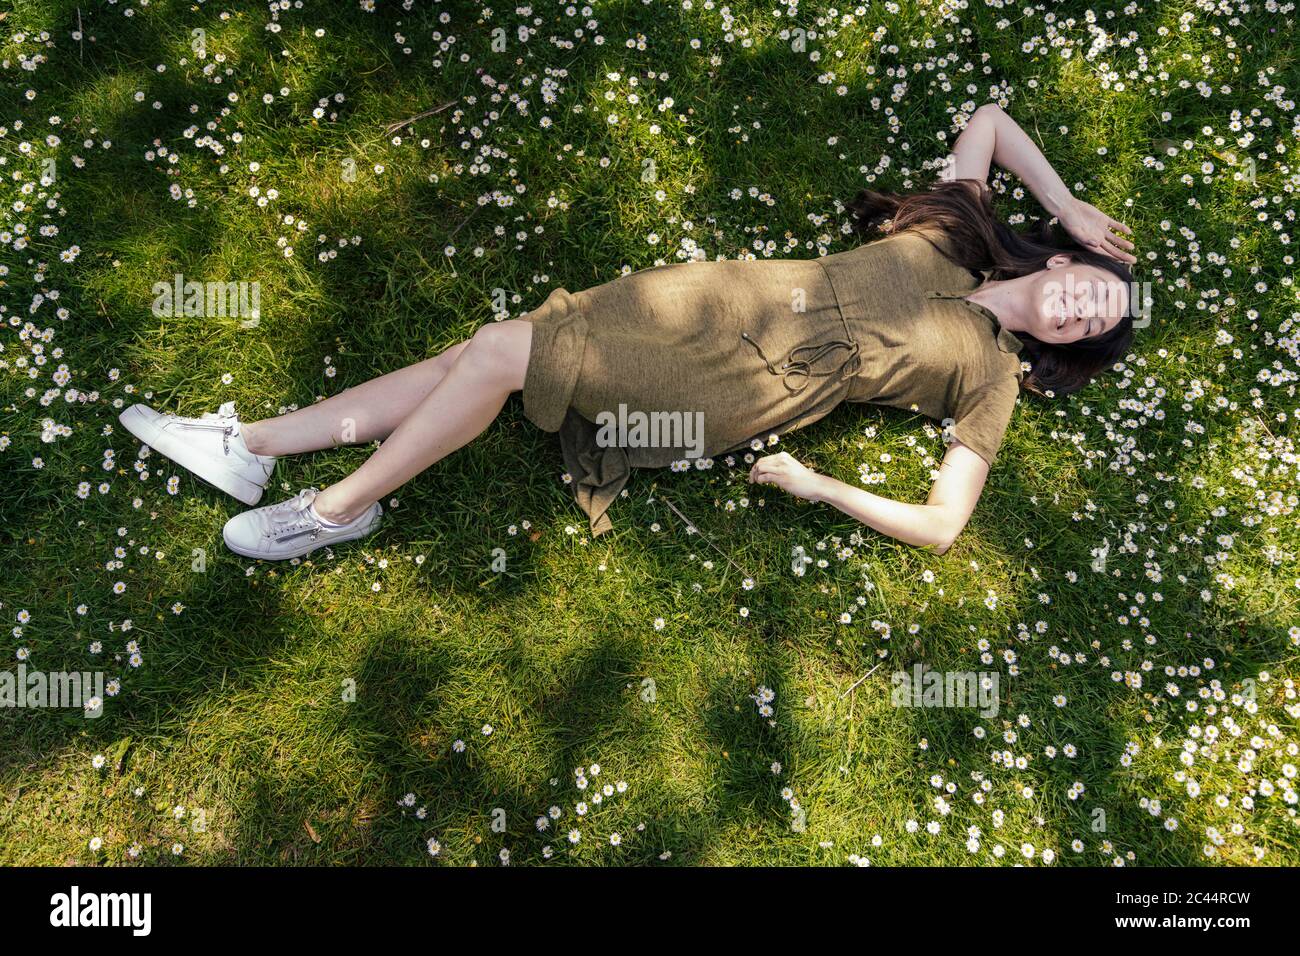 Woman enjoying her free time while lying on grass with daisies Stock Photo